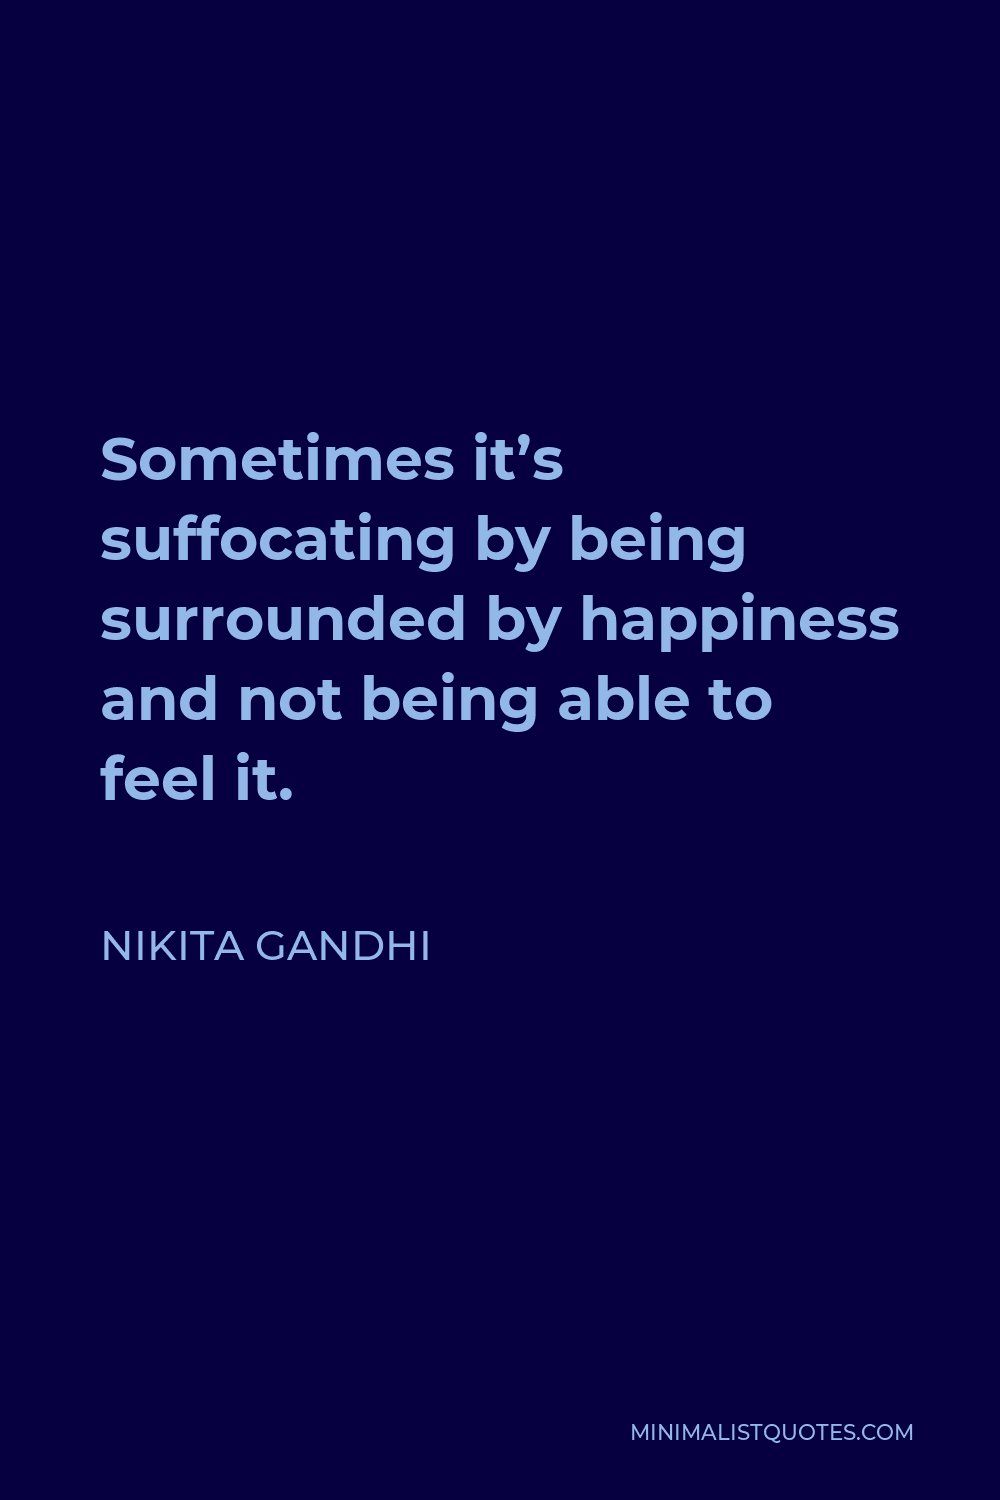 Nikita Gandhi Quote - Sometimes its suffocating by being surrounded with happiness and not being able to feel it.